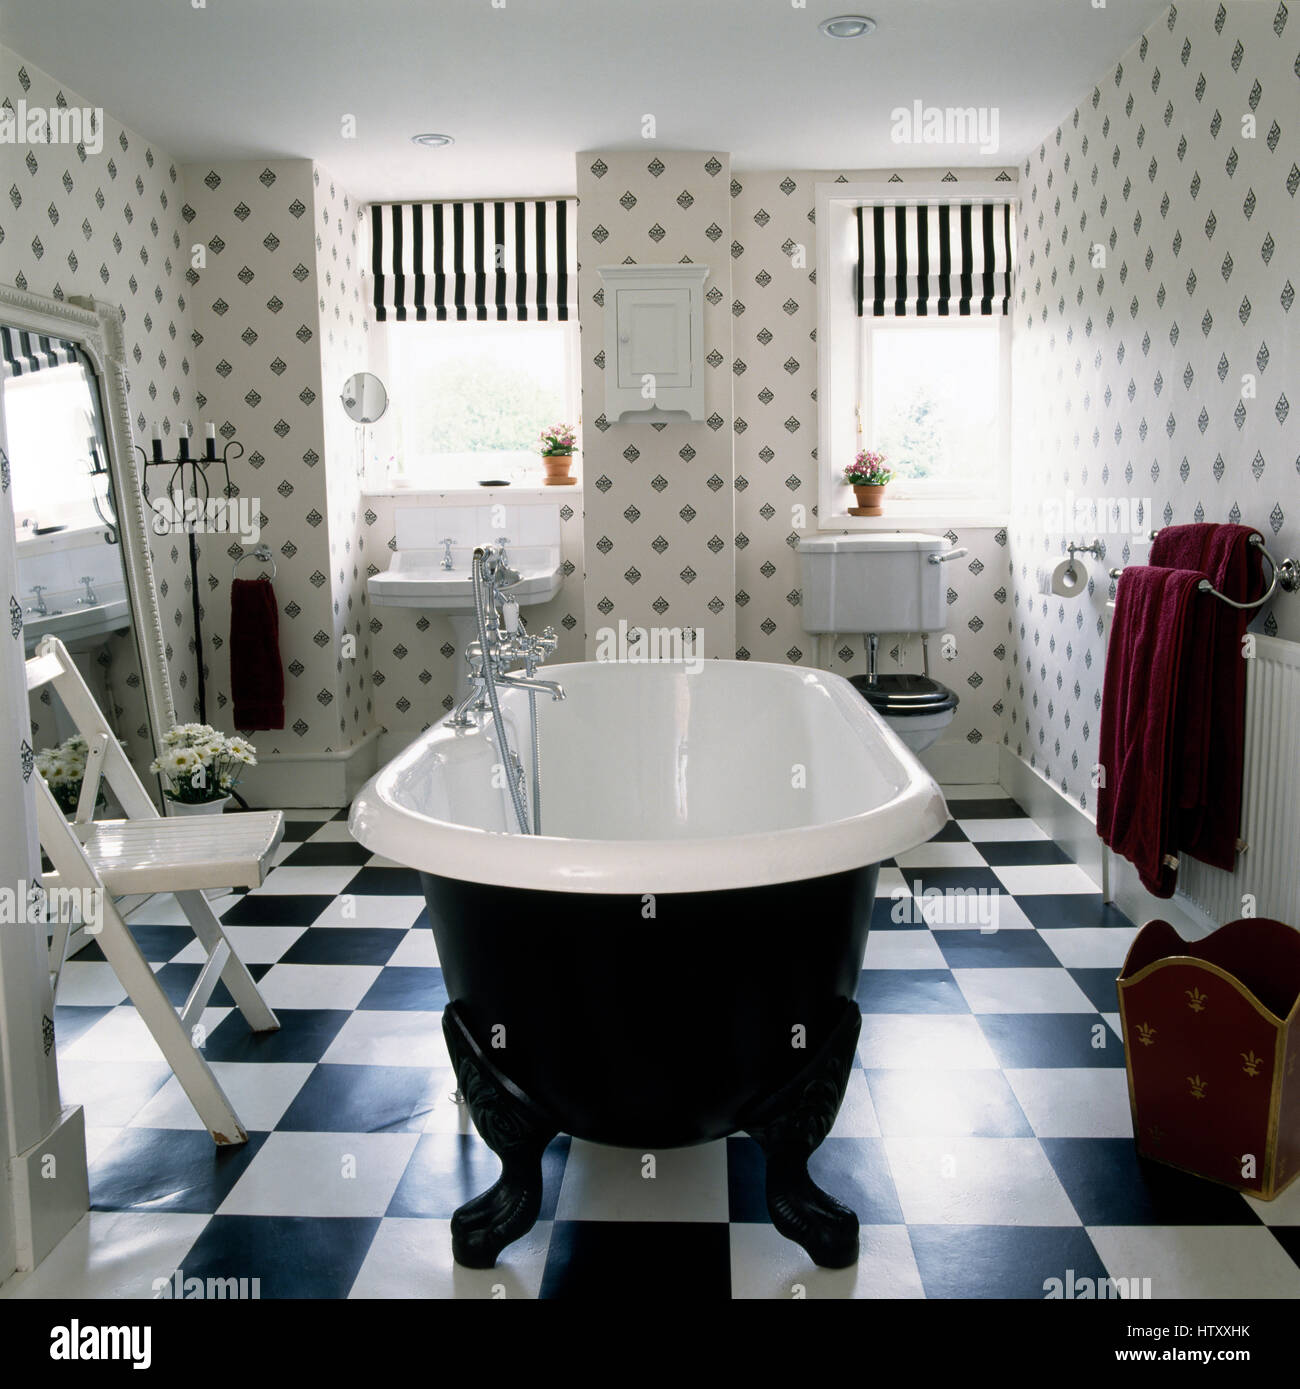 Roll top bath and black+white chequer board floor in a black and white bathroom with a simple stenciled pattern on the walls Stock Photo